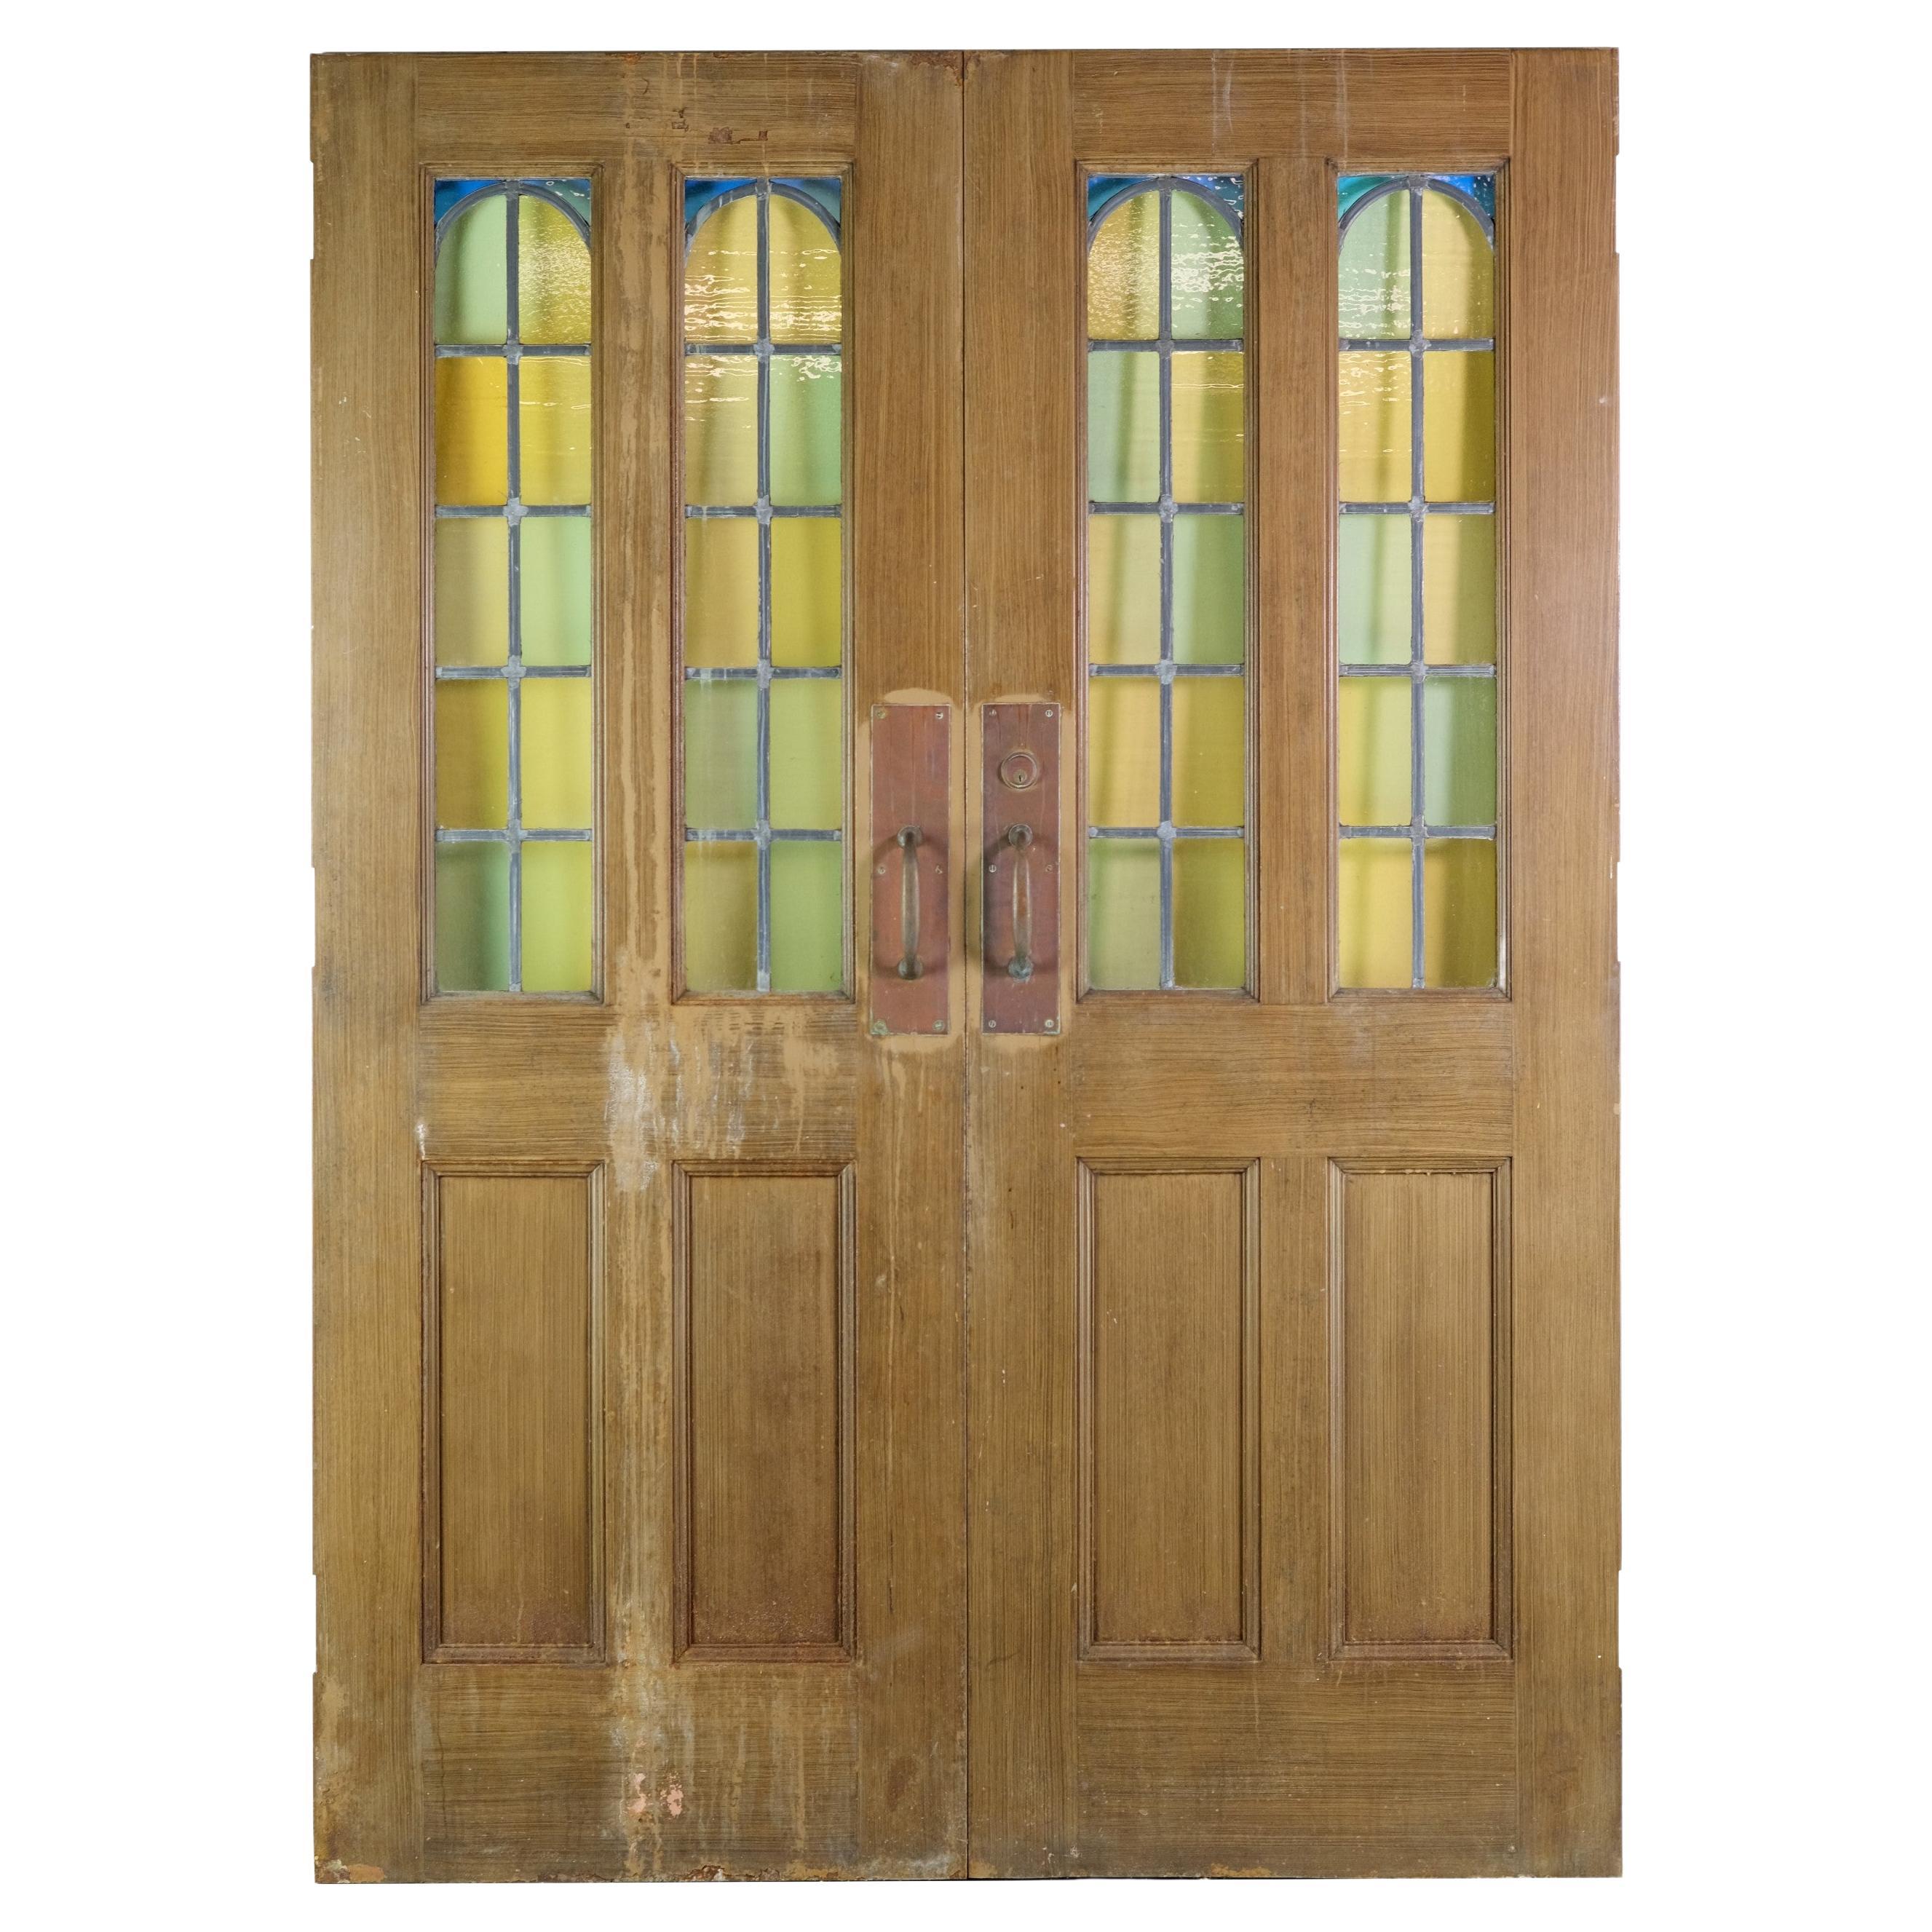 1930s Steel Double Doors with Arched Stained Leaded Glass Panels 